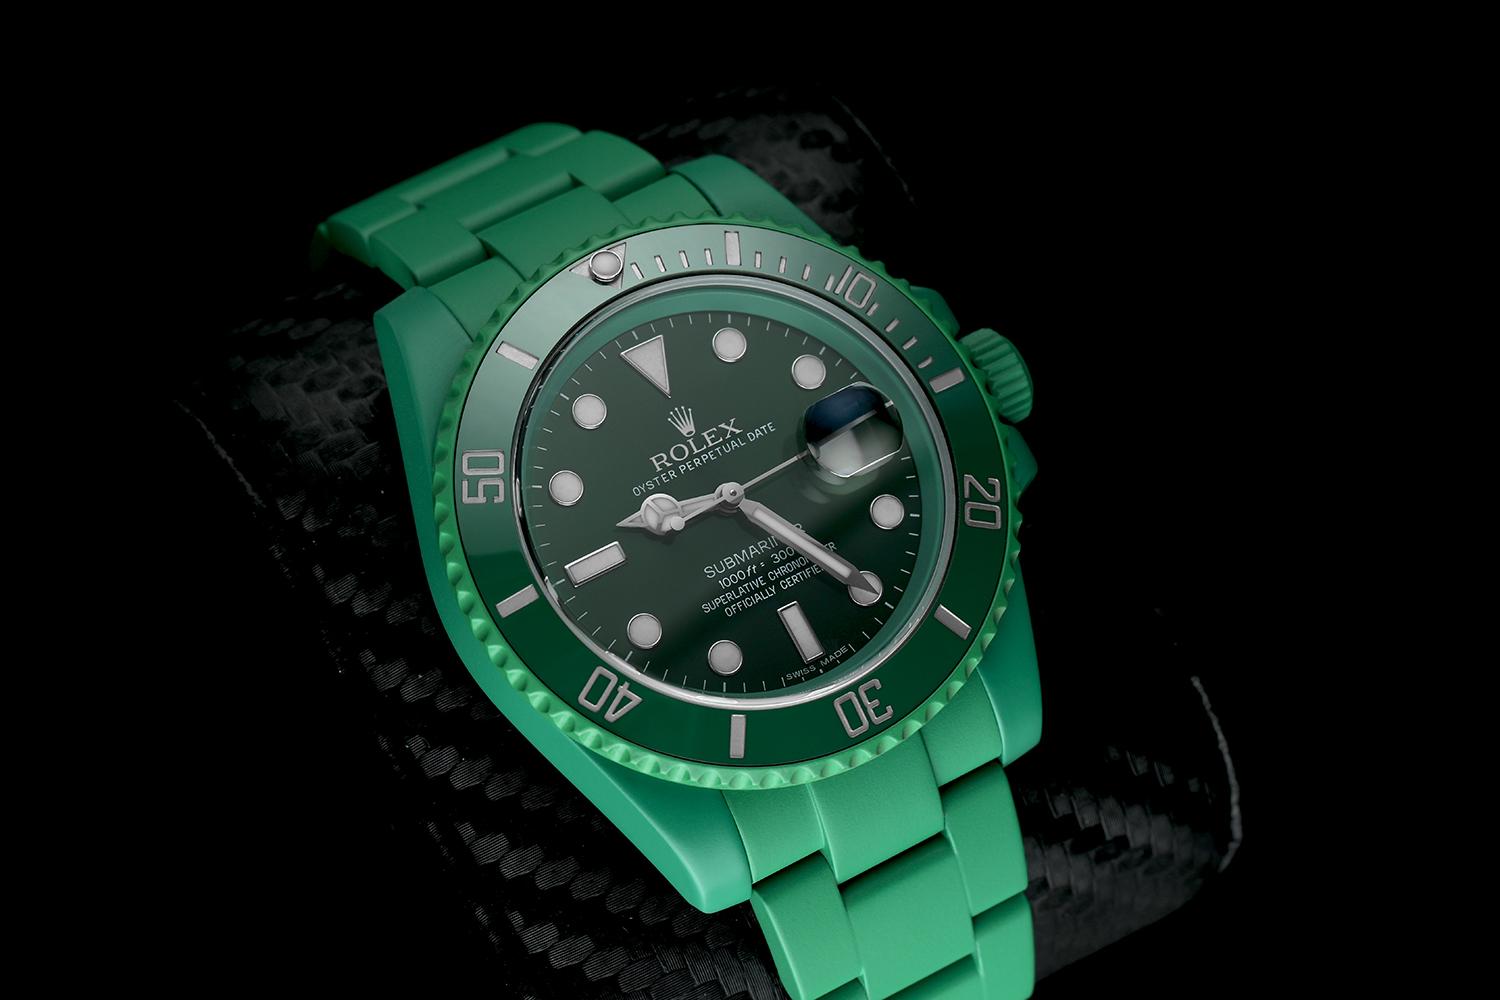 Green ceramic coating has been applied aftermarket. Very unique watch 1 out of 1. Sale comes with Rolex box, papers, appraisal certificate validating authenticity of the watch, 2 year mechanical warranty, a lifetime warranty on coating (regular